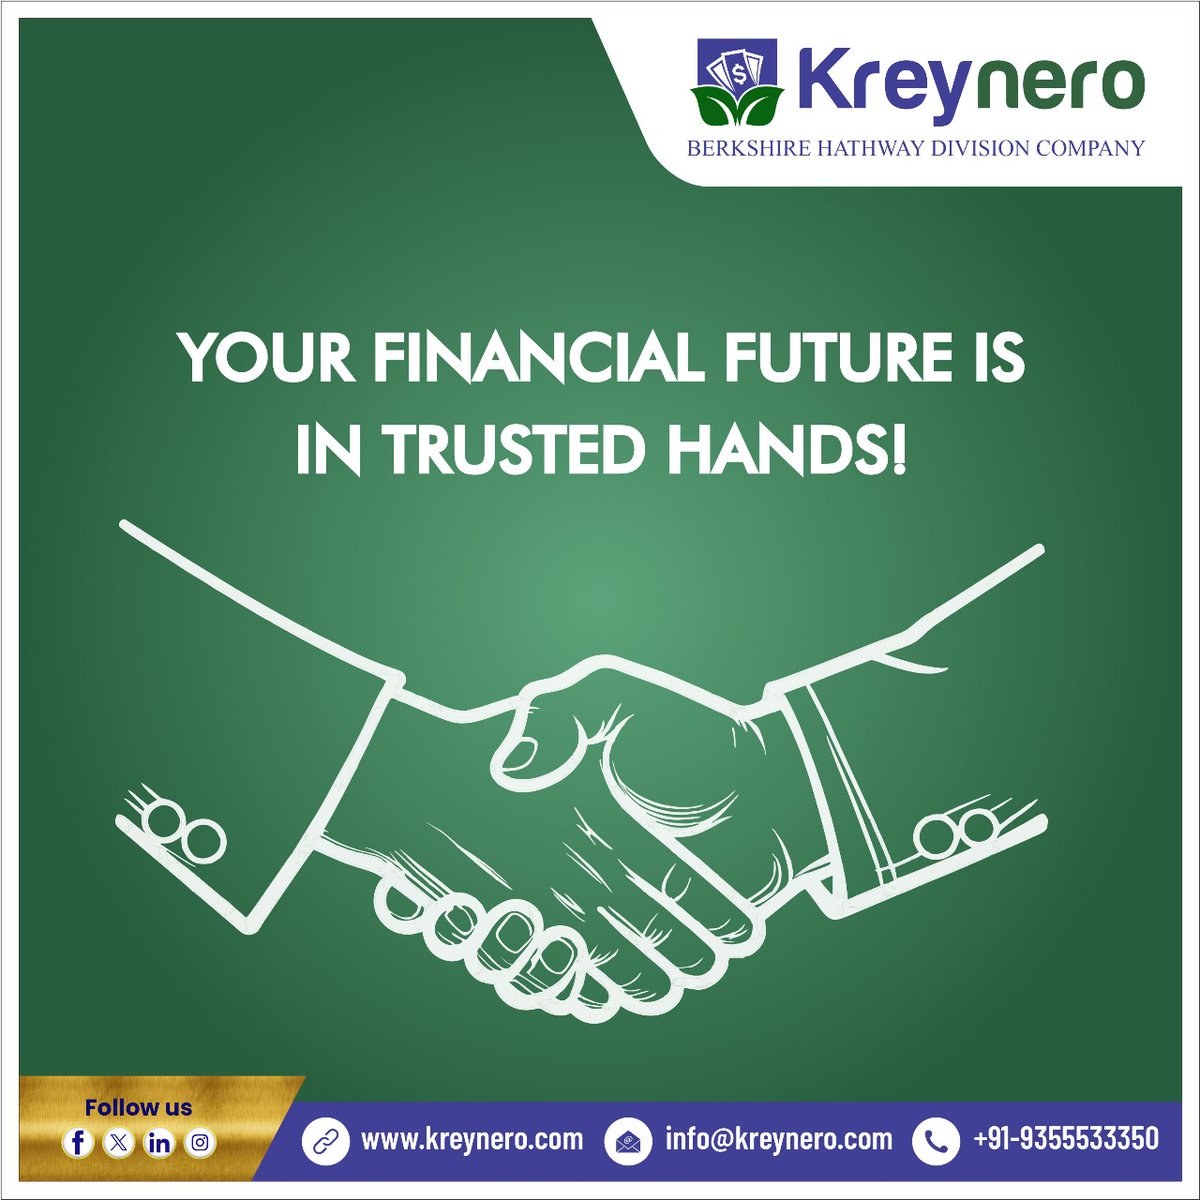 YOUR FINANCIAL FUTURE IS IN TRUSTED HANDS!
#FinancialSecurity #TrustedAdvisors #SecureInvestments #FinancialFuture #ExpertGuidance #WealthManagement #TrustedHands #FinancialPlanning #SmartInvesting #securefuture